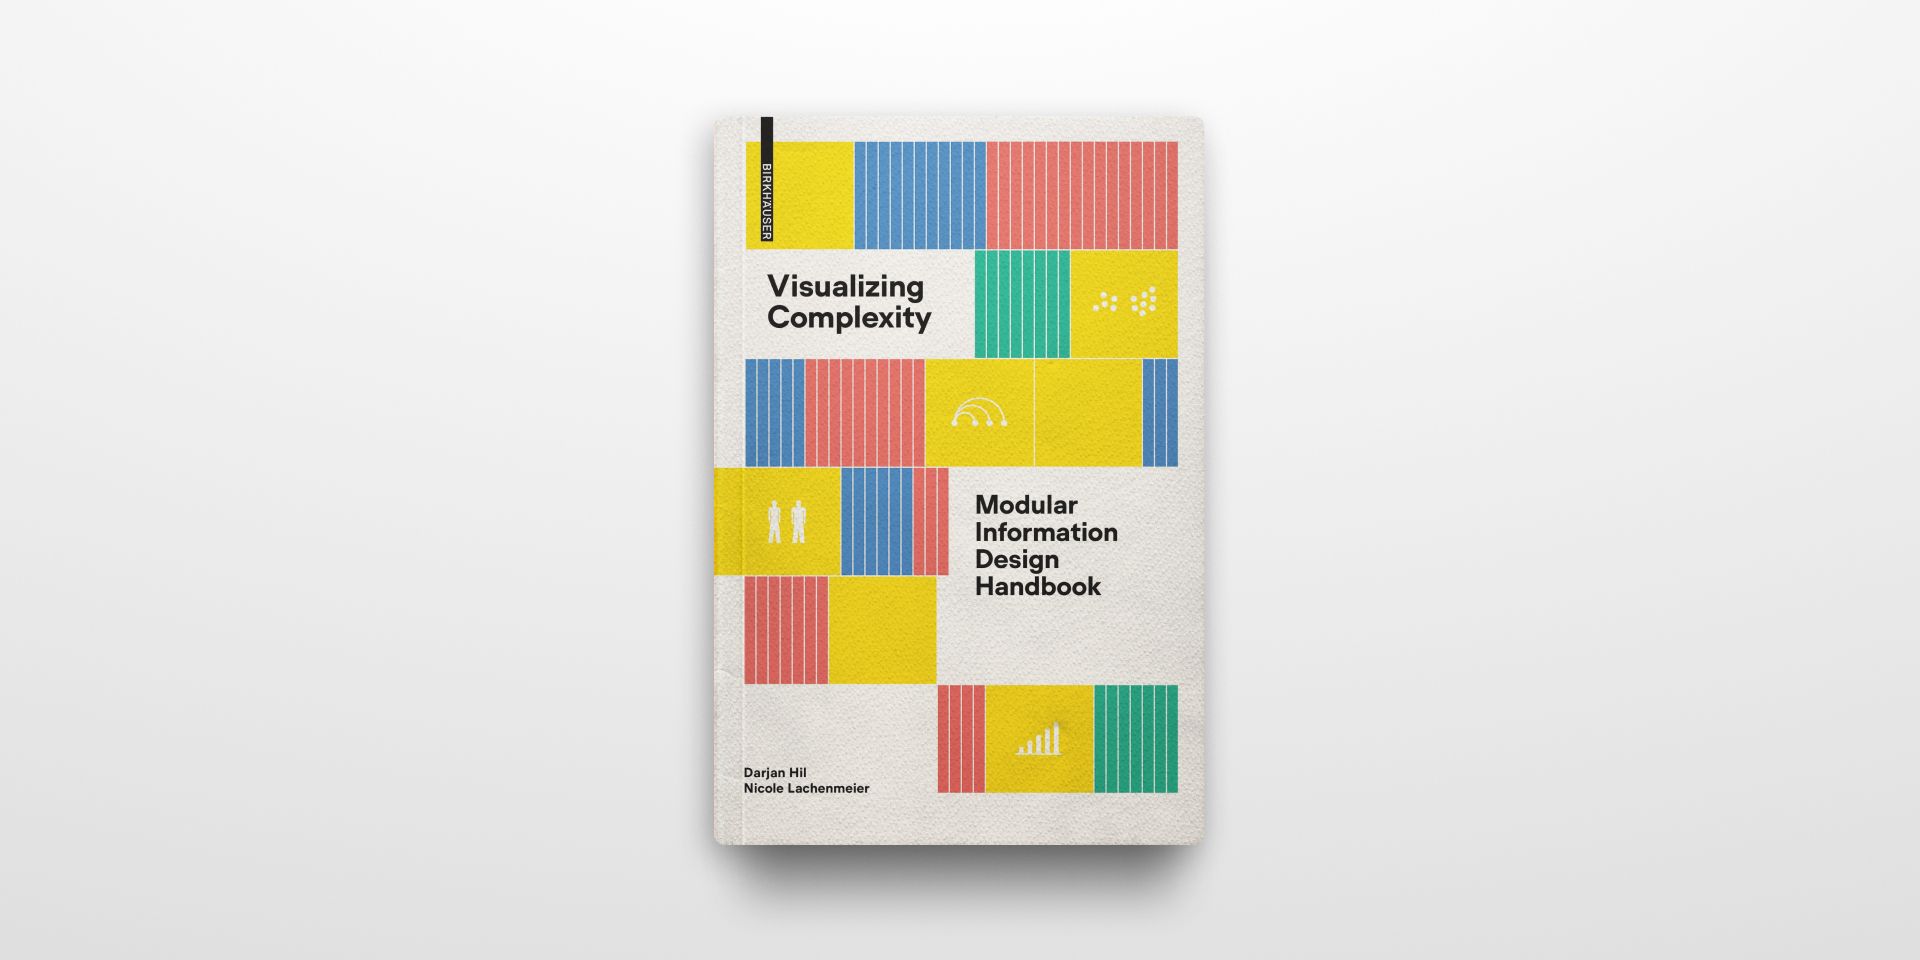 Visualizing Complexity book cover